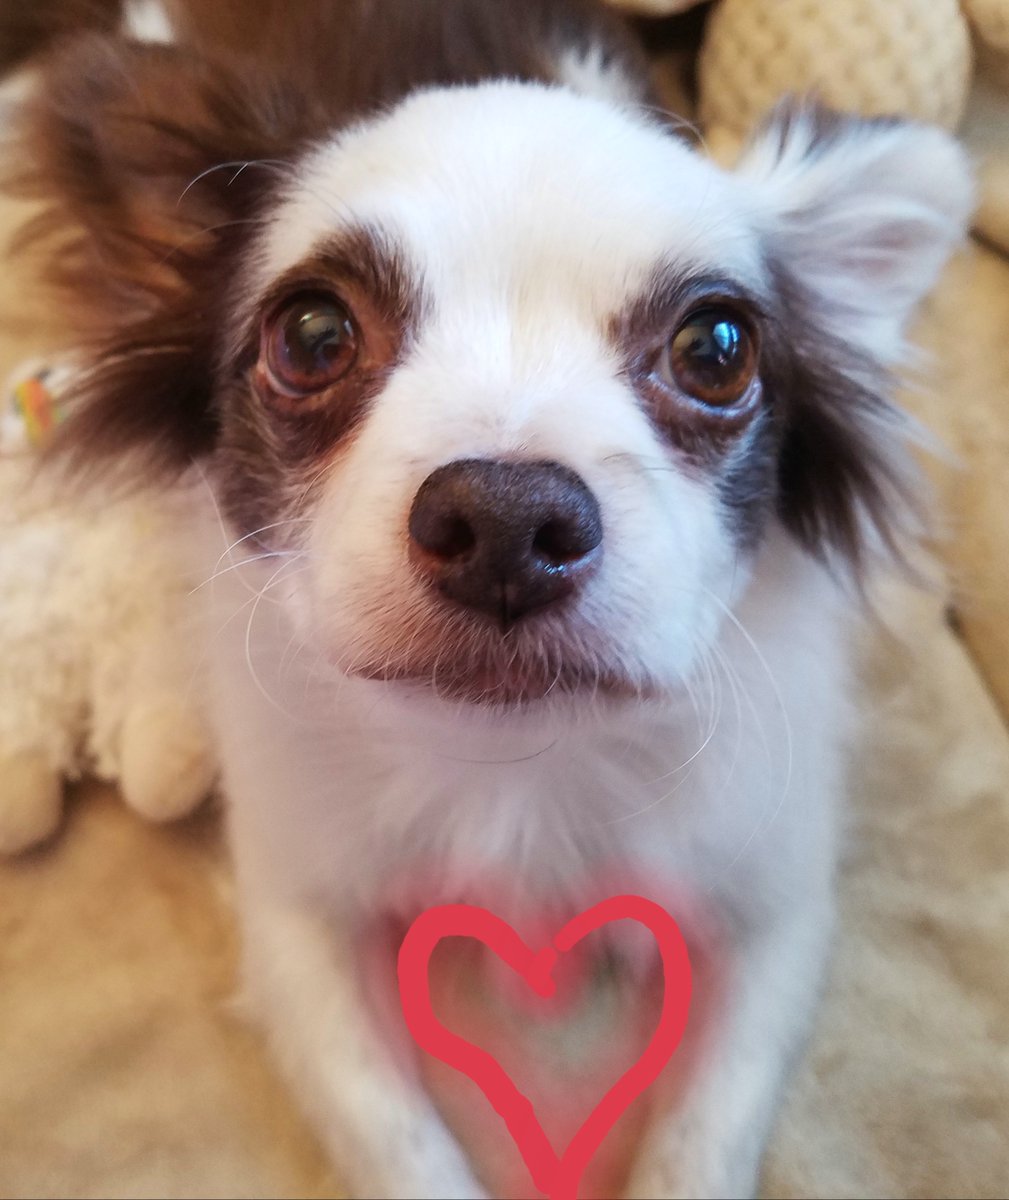 I hope I get to 7000 fwends & followers! I wuv to spread da wuv & more fwends means more wuv to share!❤️ I make dis heart wif my arms to show yoo all da wuv in my li'l Boo heart for YOO, my pals! Will yoo help me spread da wuv? 😘💕❤️🐶 #dogsoftwitter #rescuedog #LoveWins